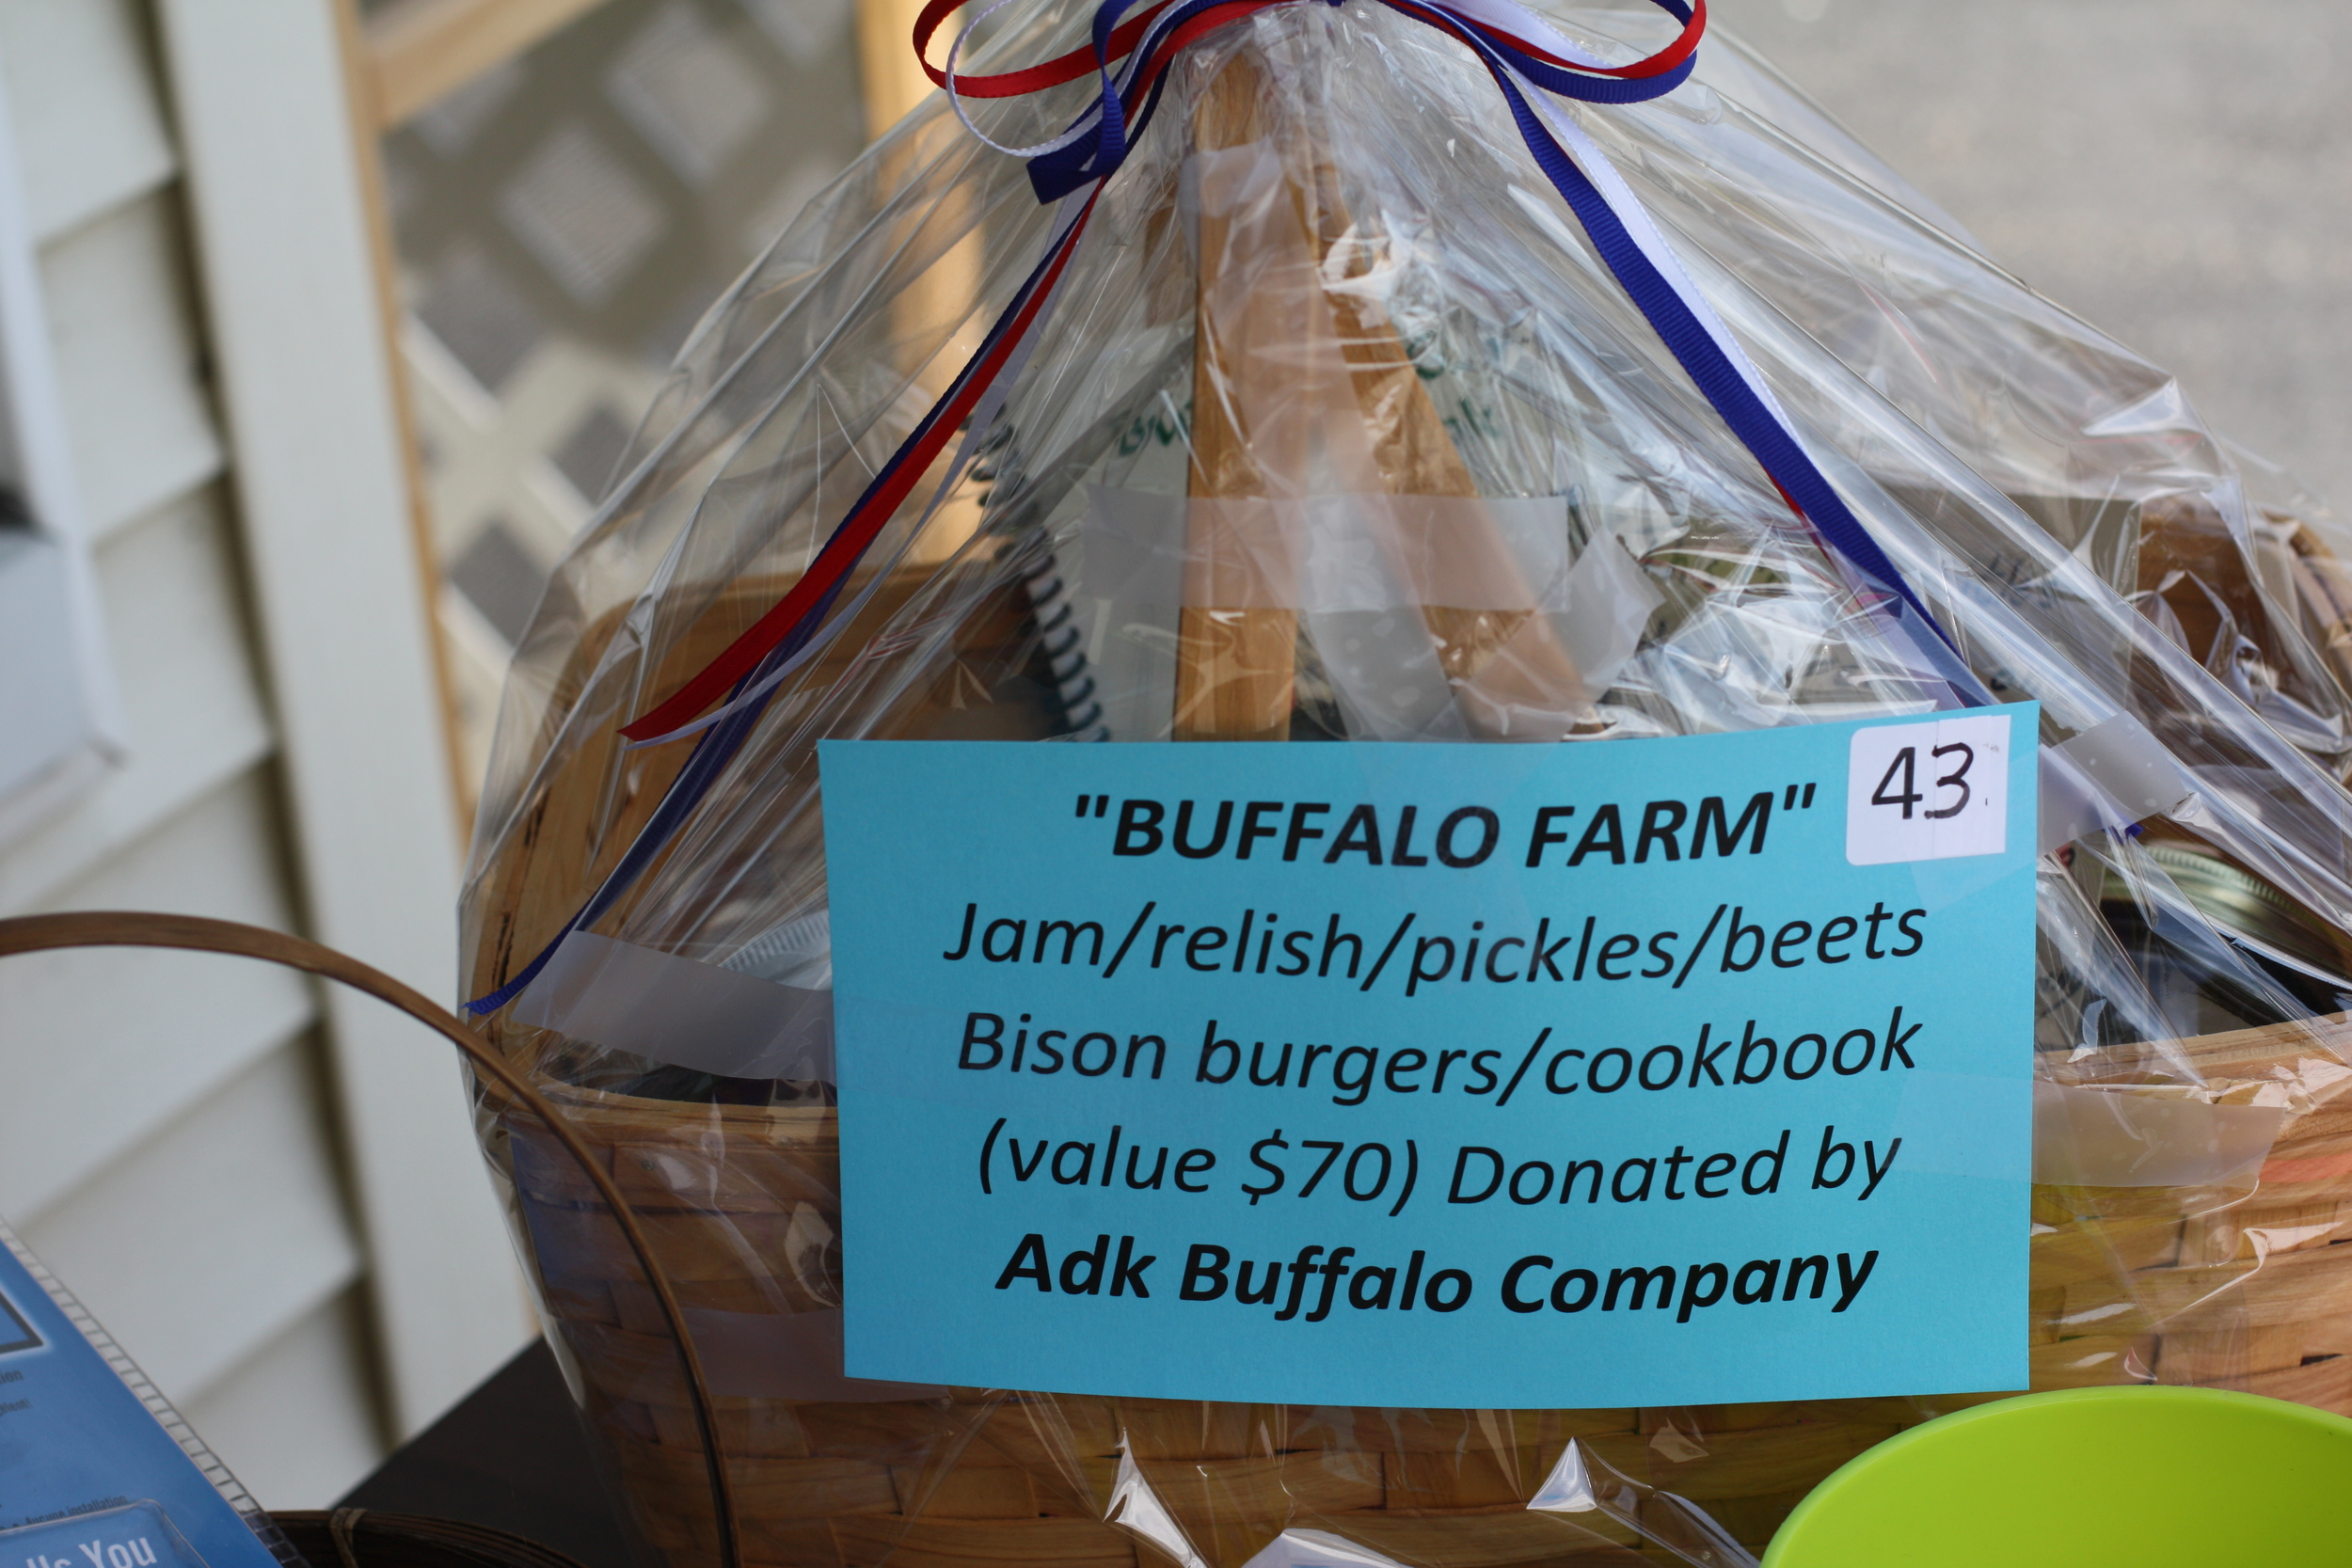 Prizes galore at the Annual Schroon Lake Chamber of Commerce Basket Raffle!